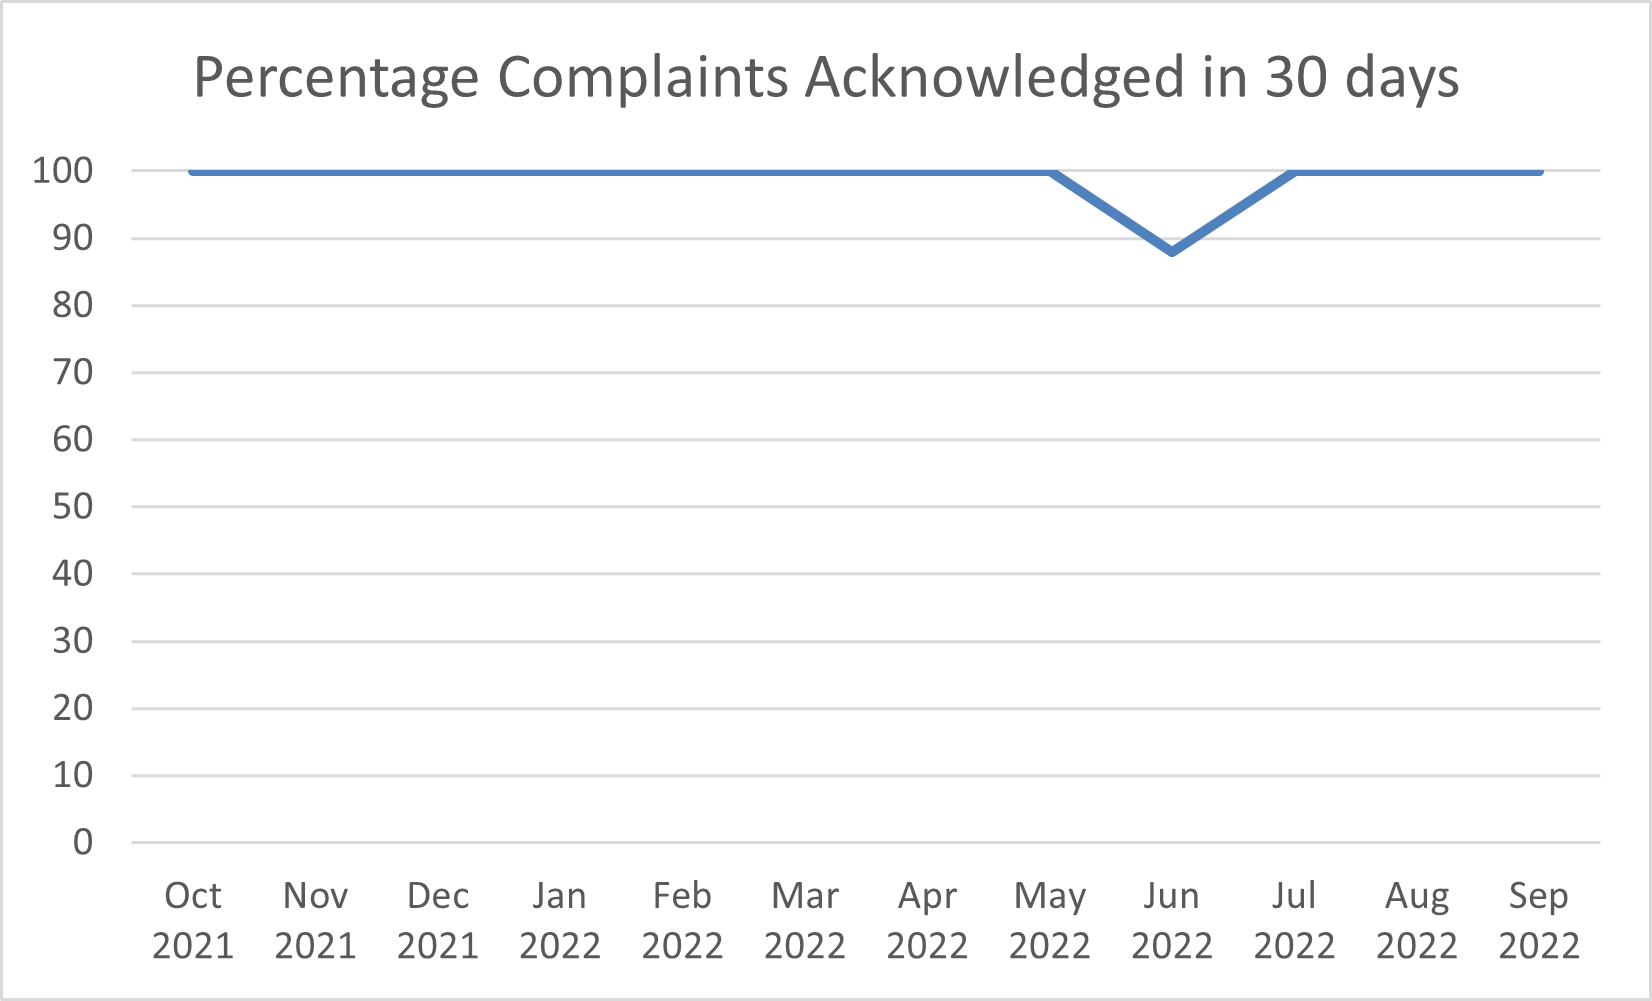 Percentage Complaints Acknowledged in 30 Days